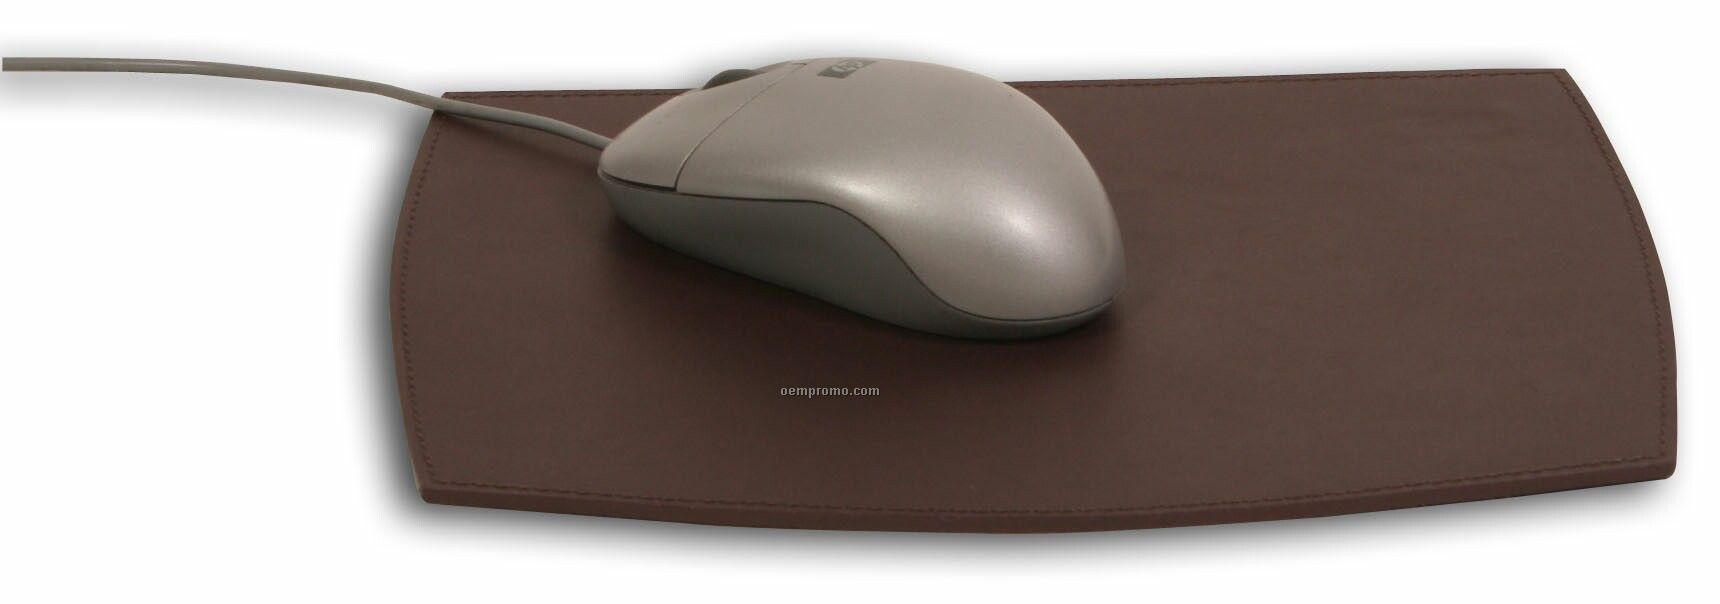 Chocolate Brown Classic Leather Mouse Pad